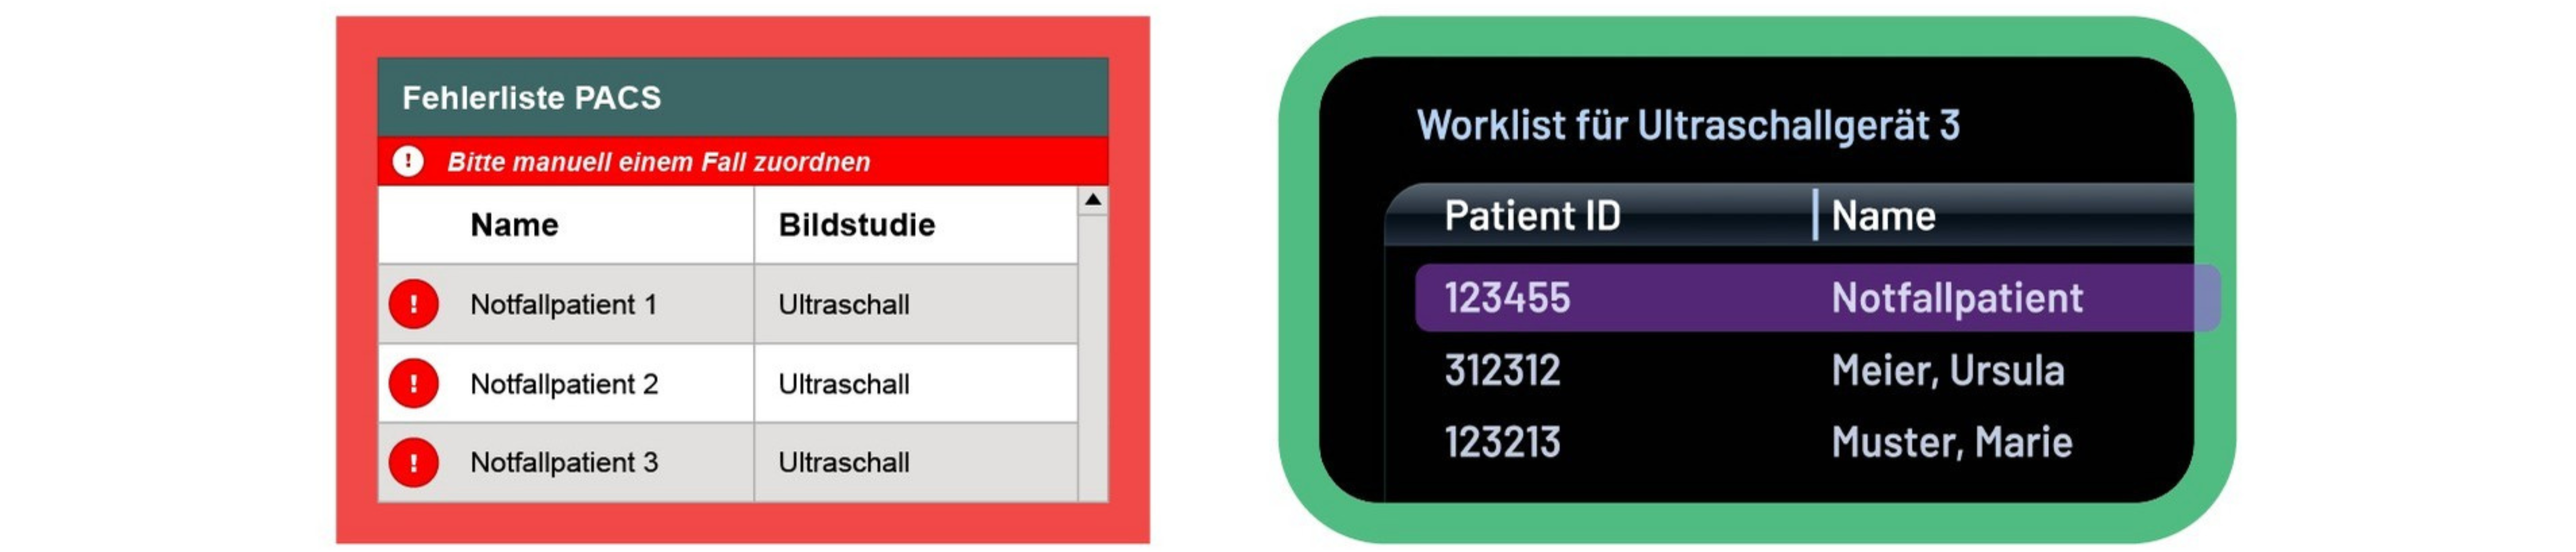 No error list anymore in the PACS for. Add emergency patients ad-hoc to a worklist.